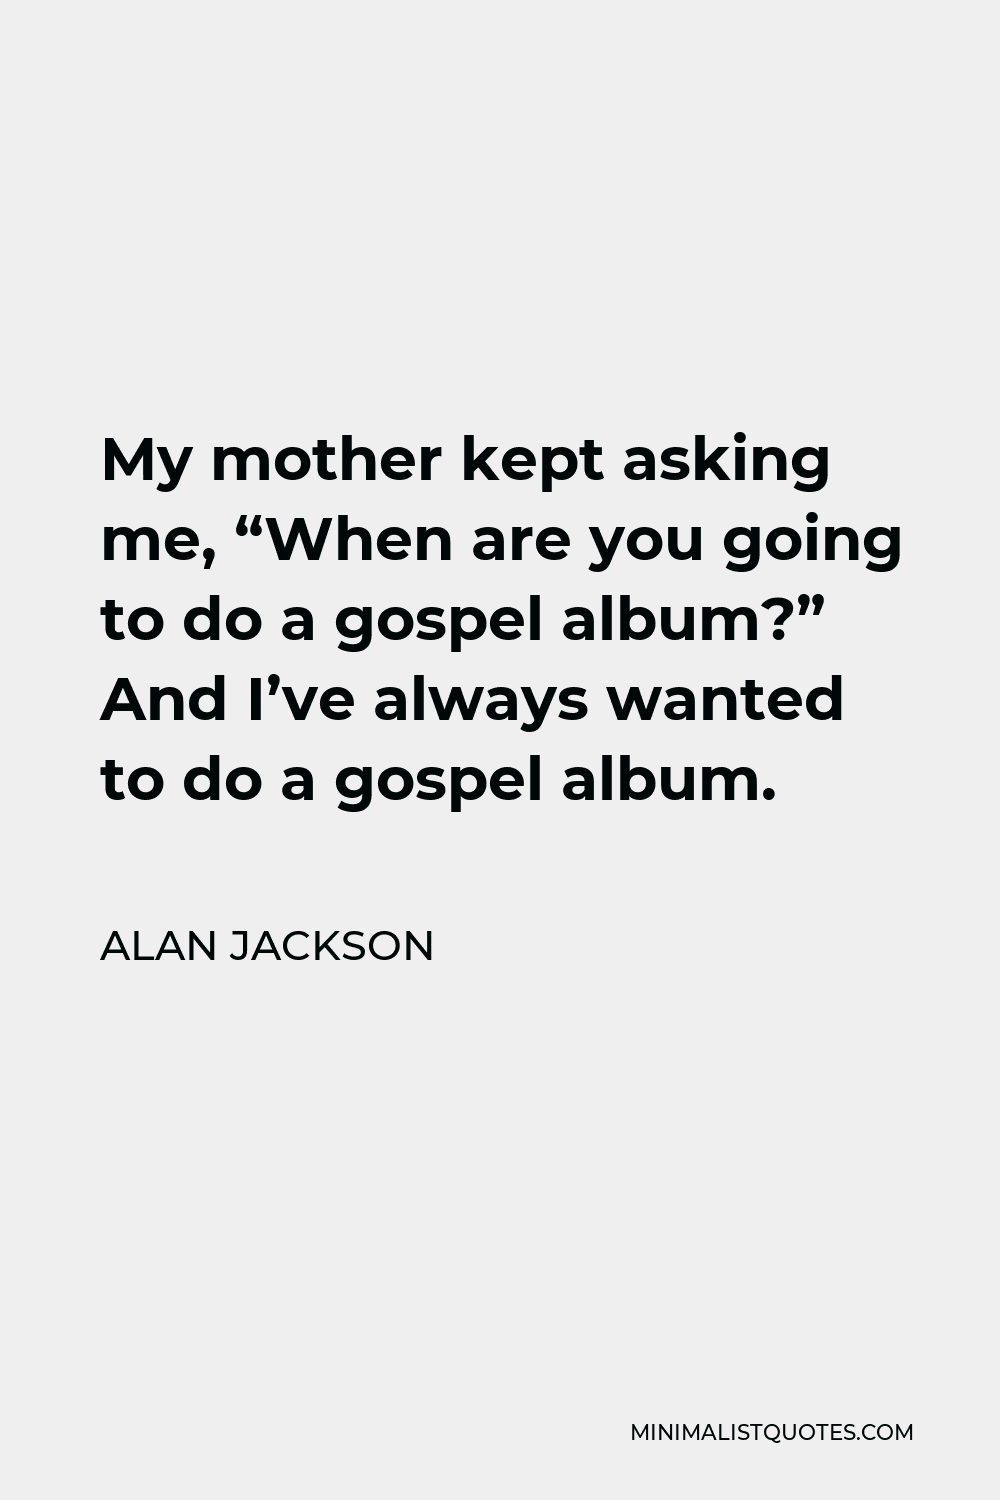 Alan Jackson Quote - My mother kept asking me, “When are you going to do a gospel album?” And I’ve always wanted to do a gospel album.